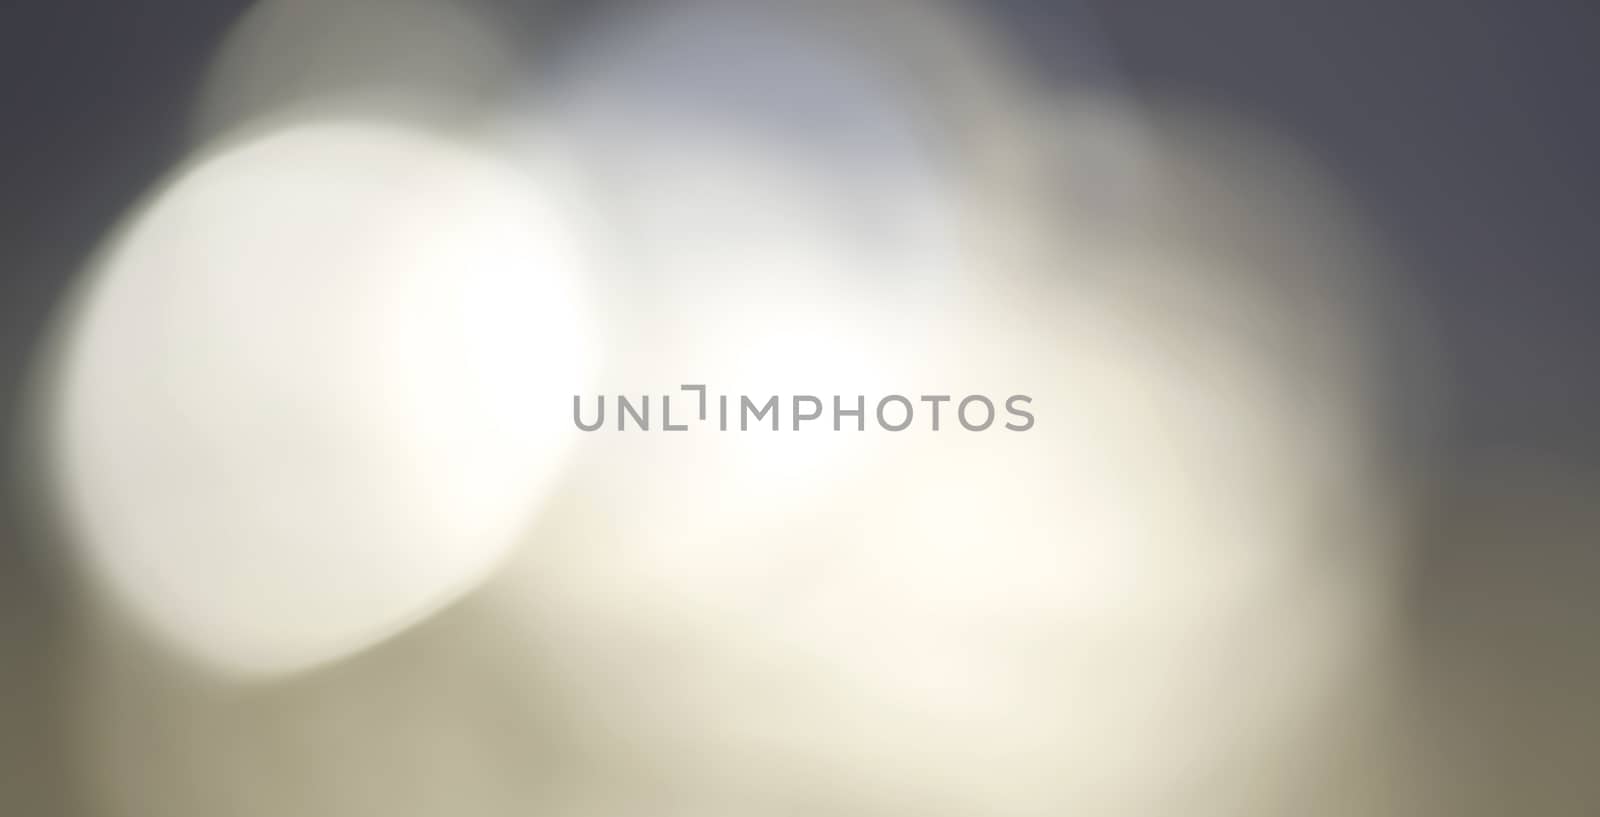 Abstract blur background made by light source